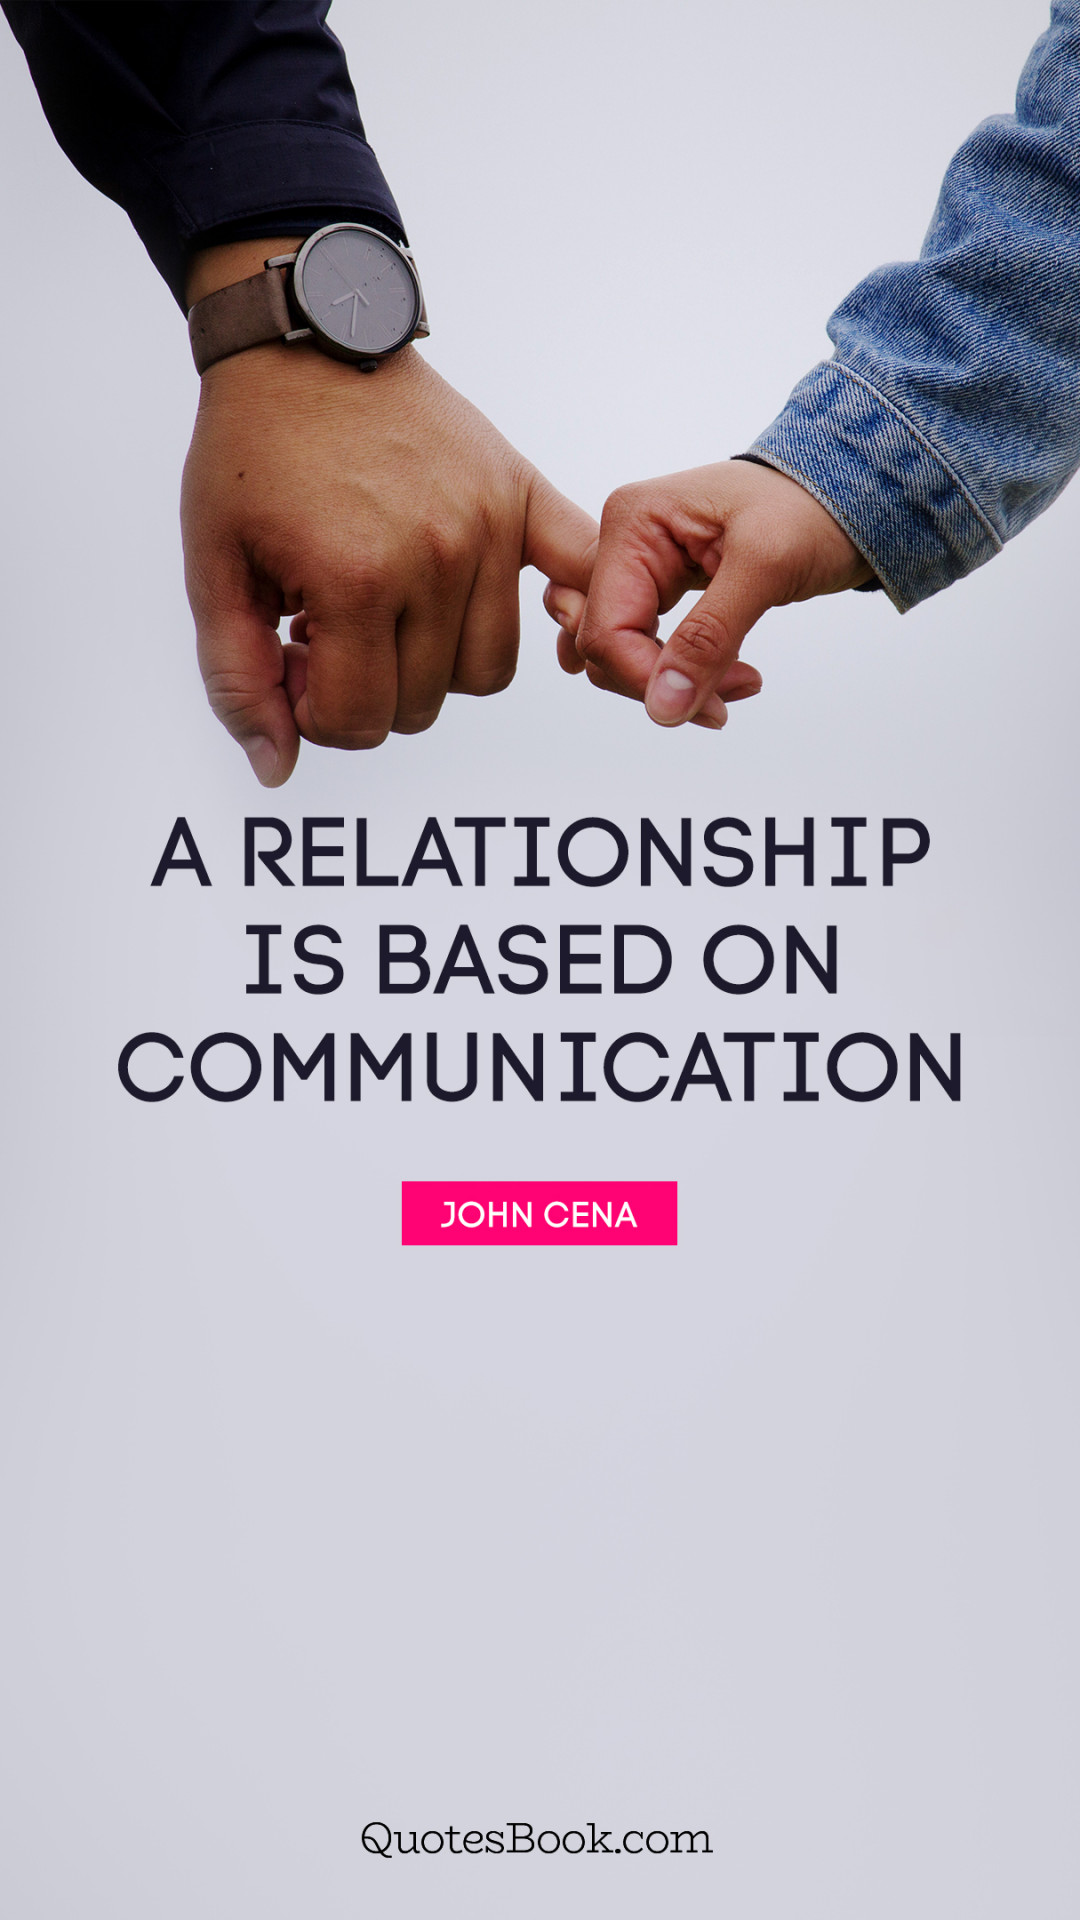 A relationship is based on communication. - Quote by John Cena - QuotesBook